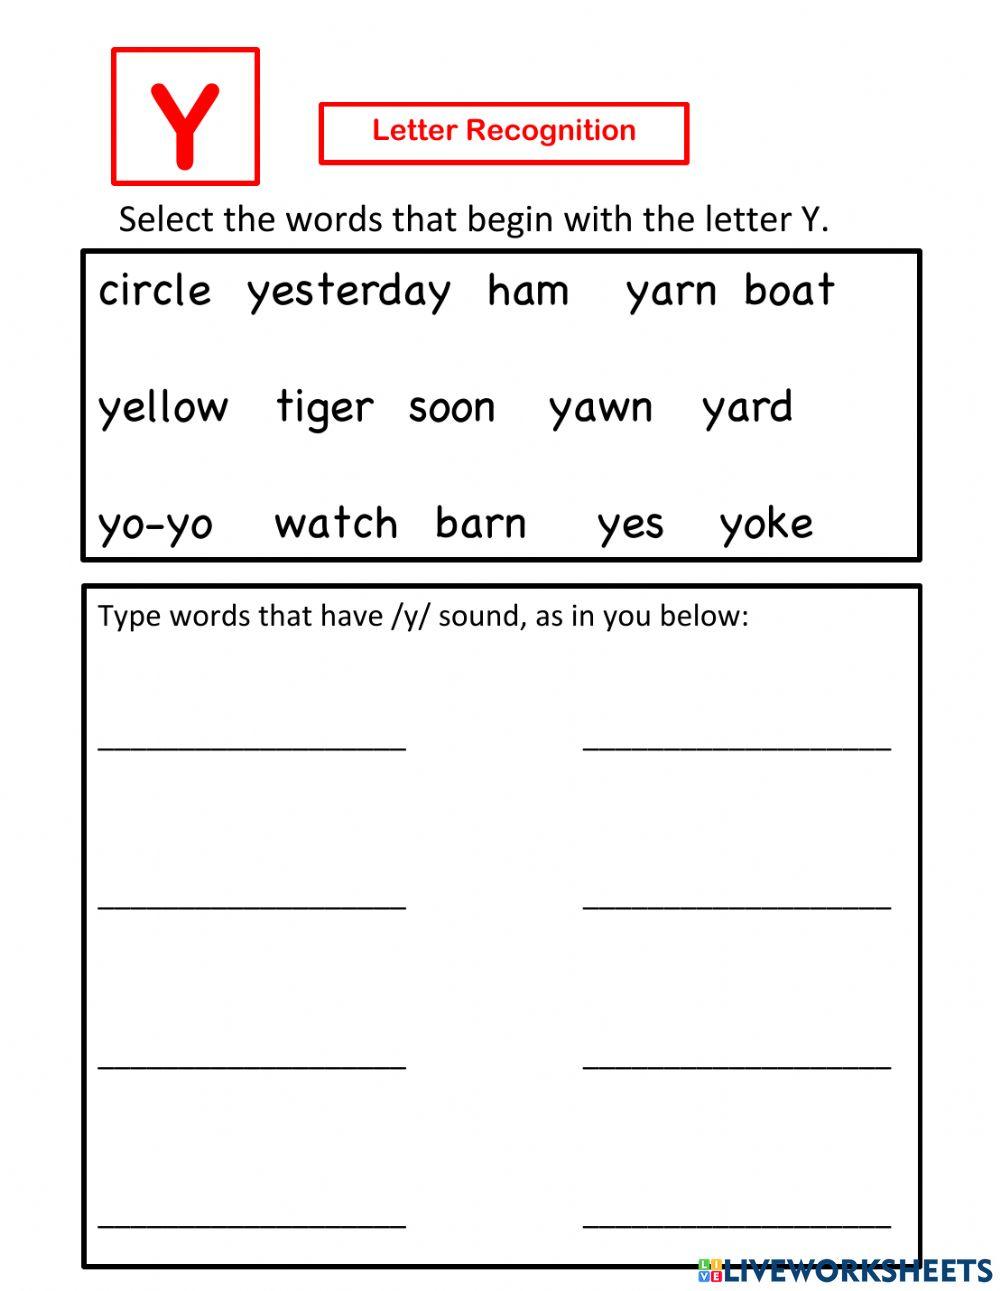 Letter Y recognition - Select and Write